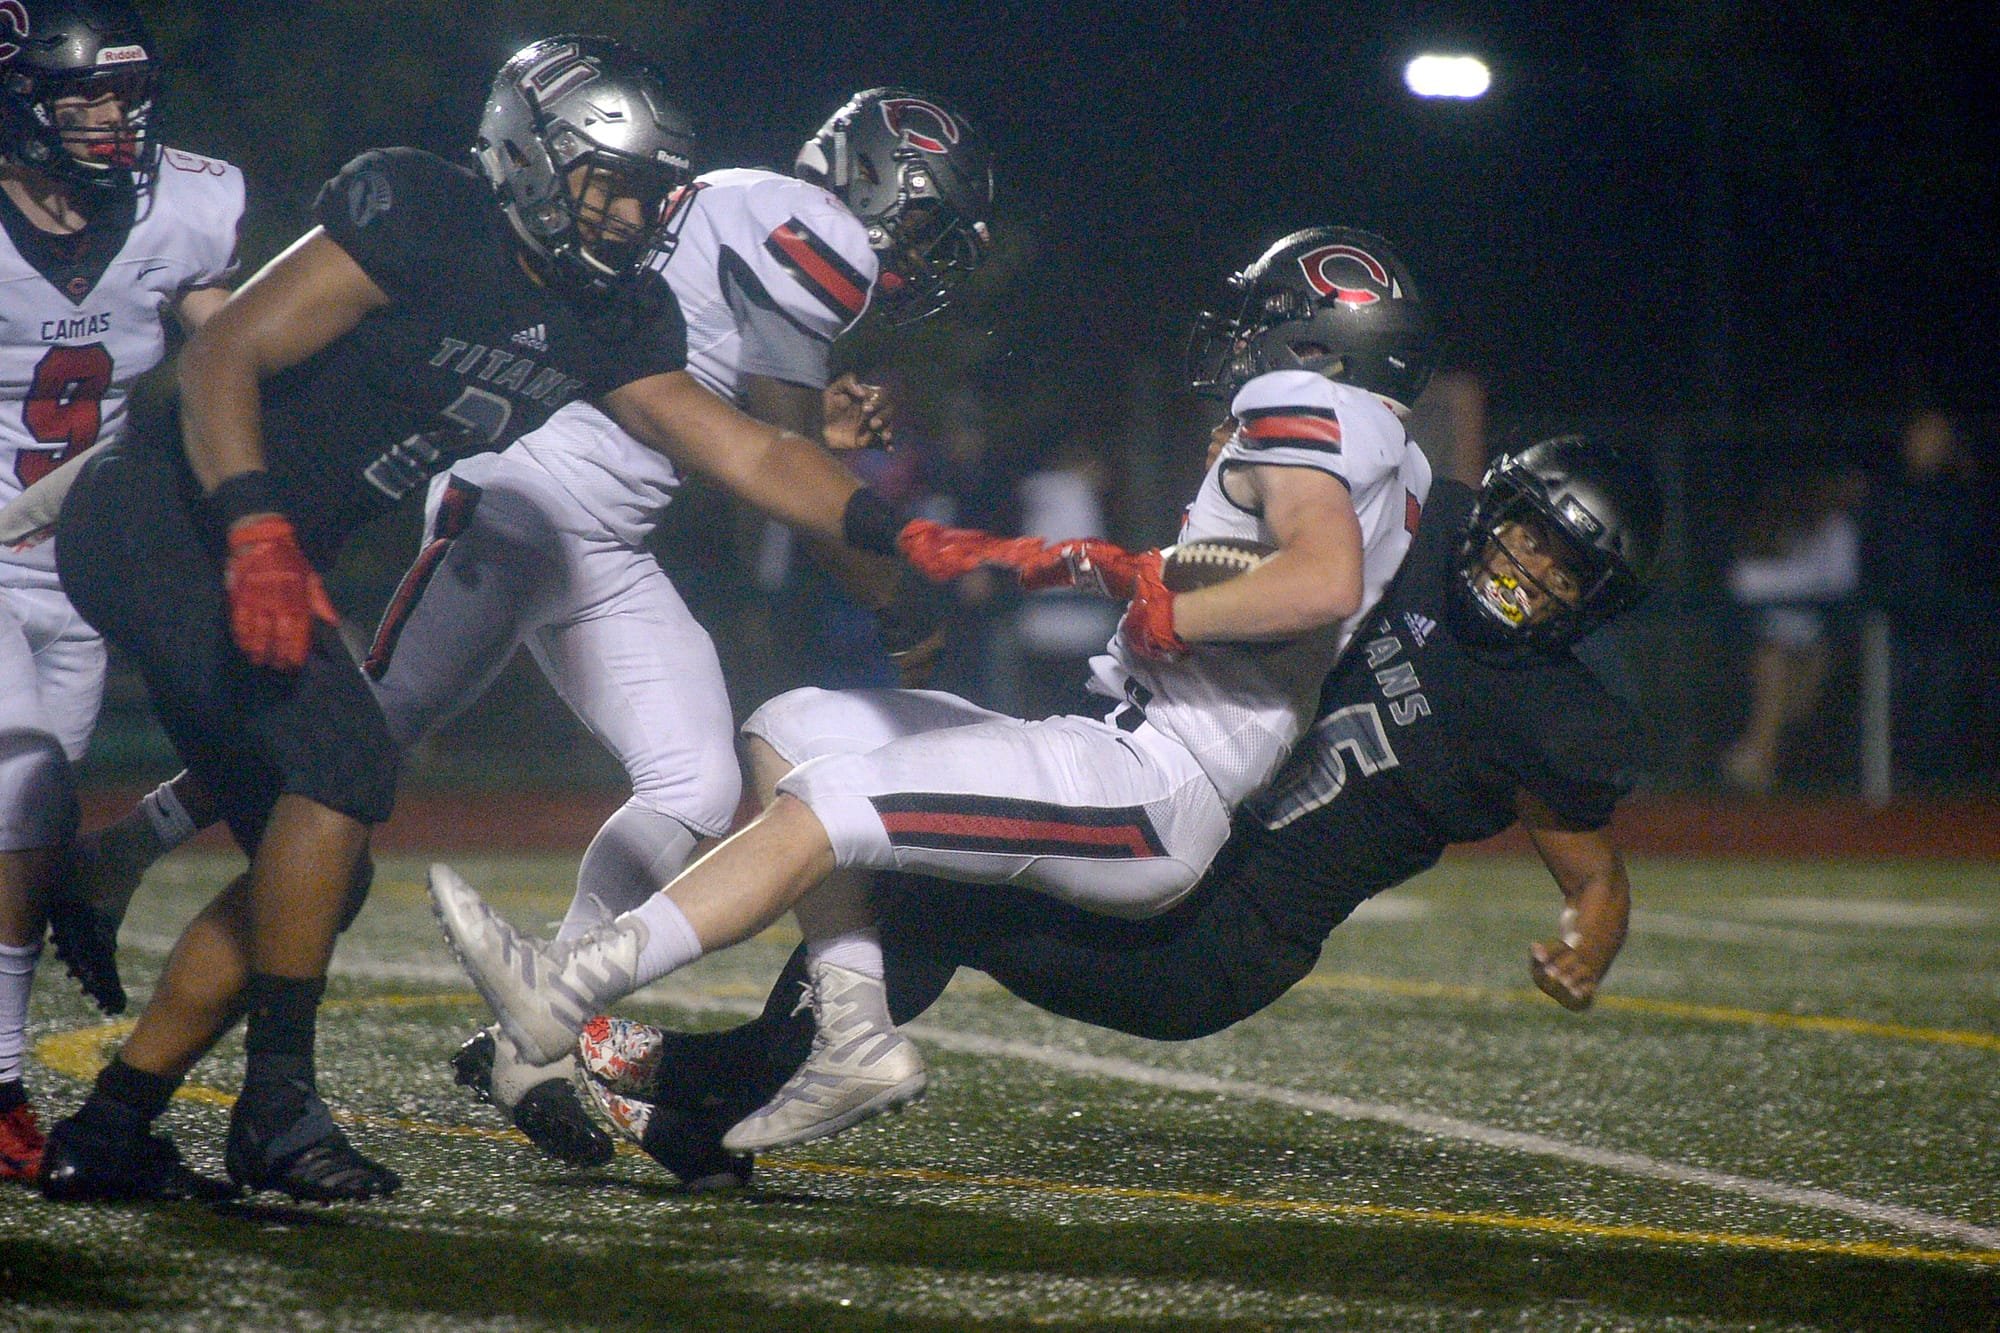 Union's Lincoln Victor takes down a Camas punt returner (7) at McKenzie Stadium in Vancouver on Friday, October 26, 2018. Union beat Camas 14-7.